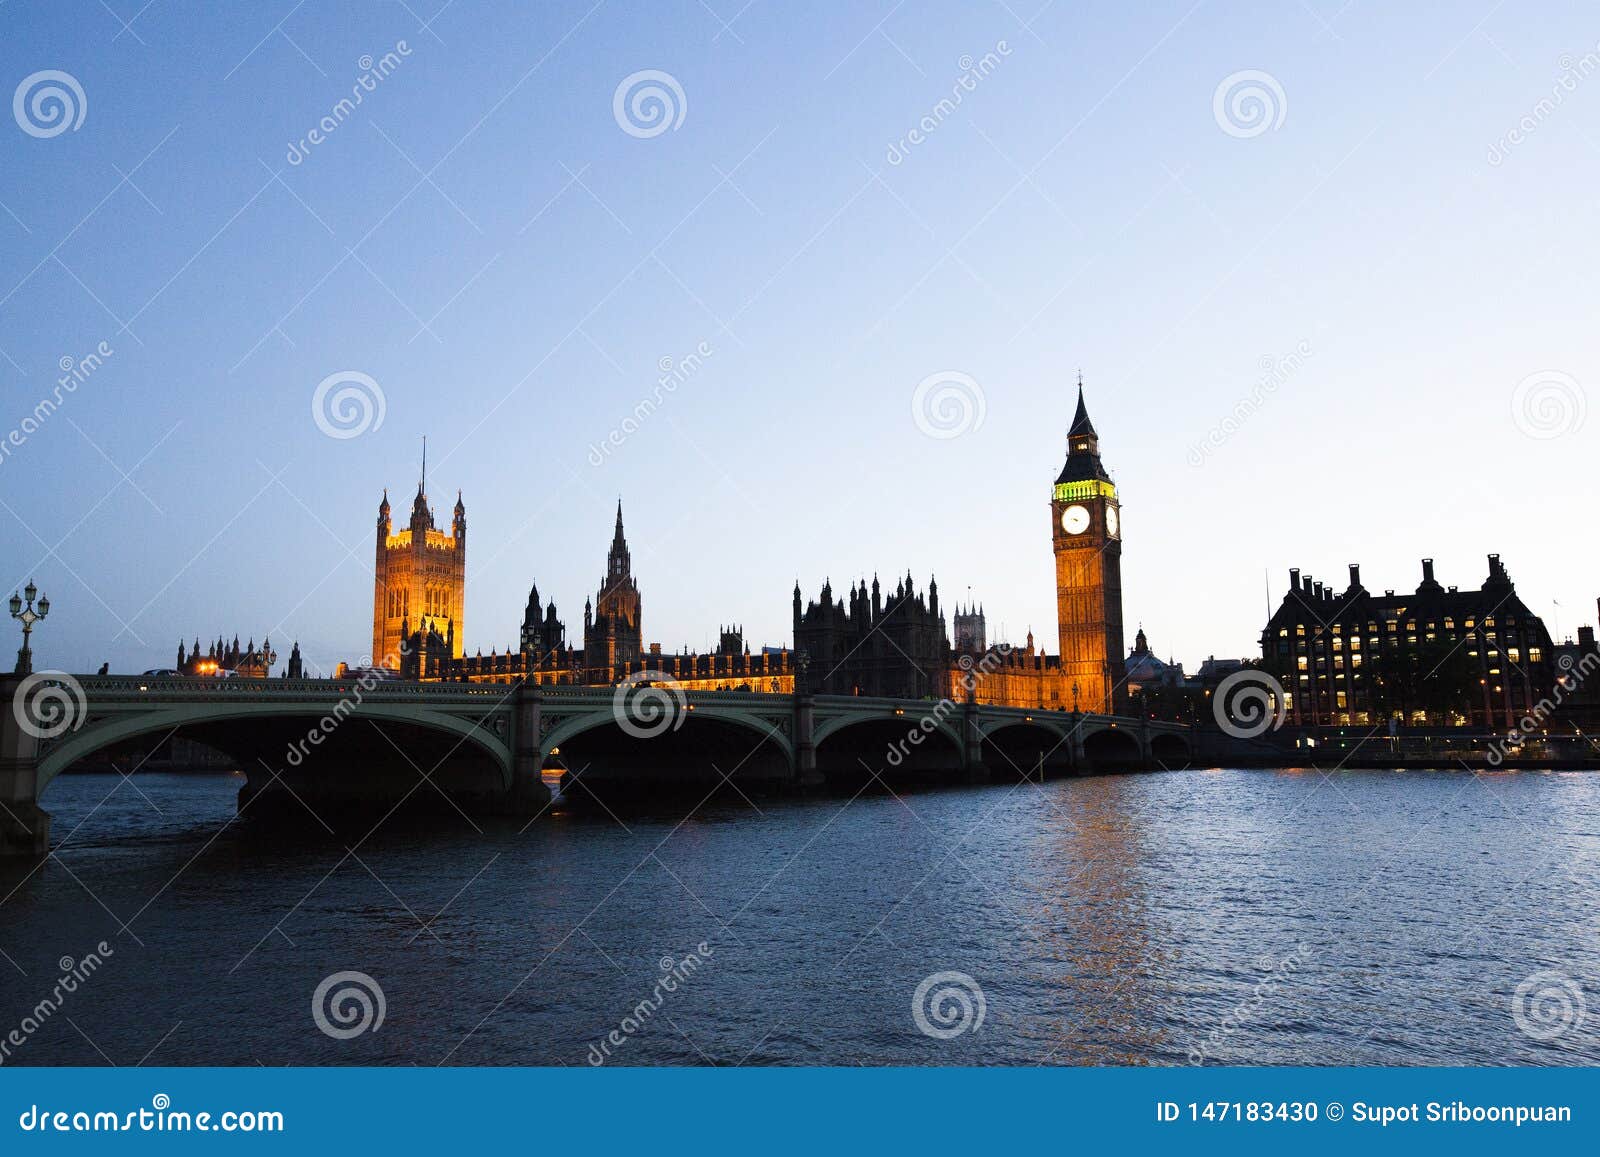 bigben clock with building over the them river